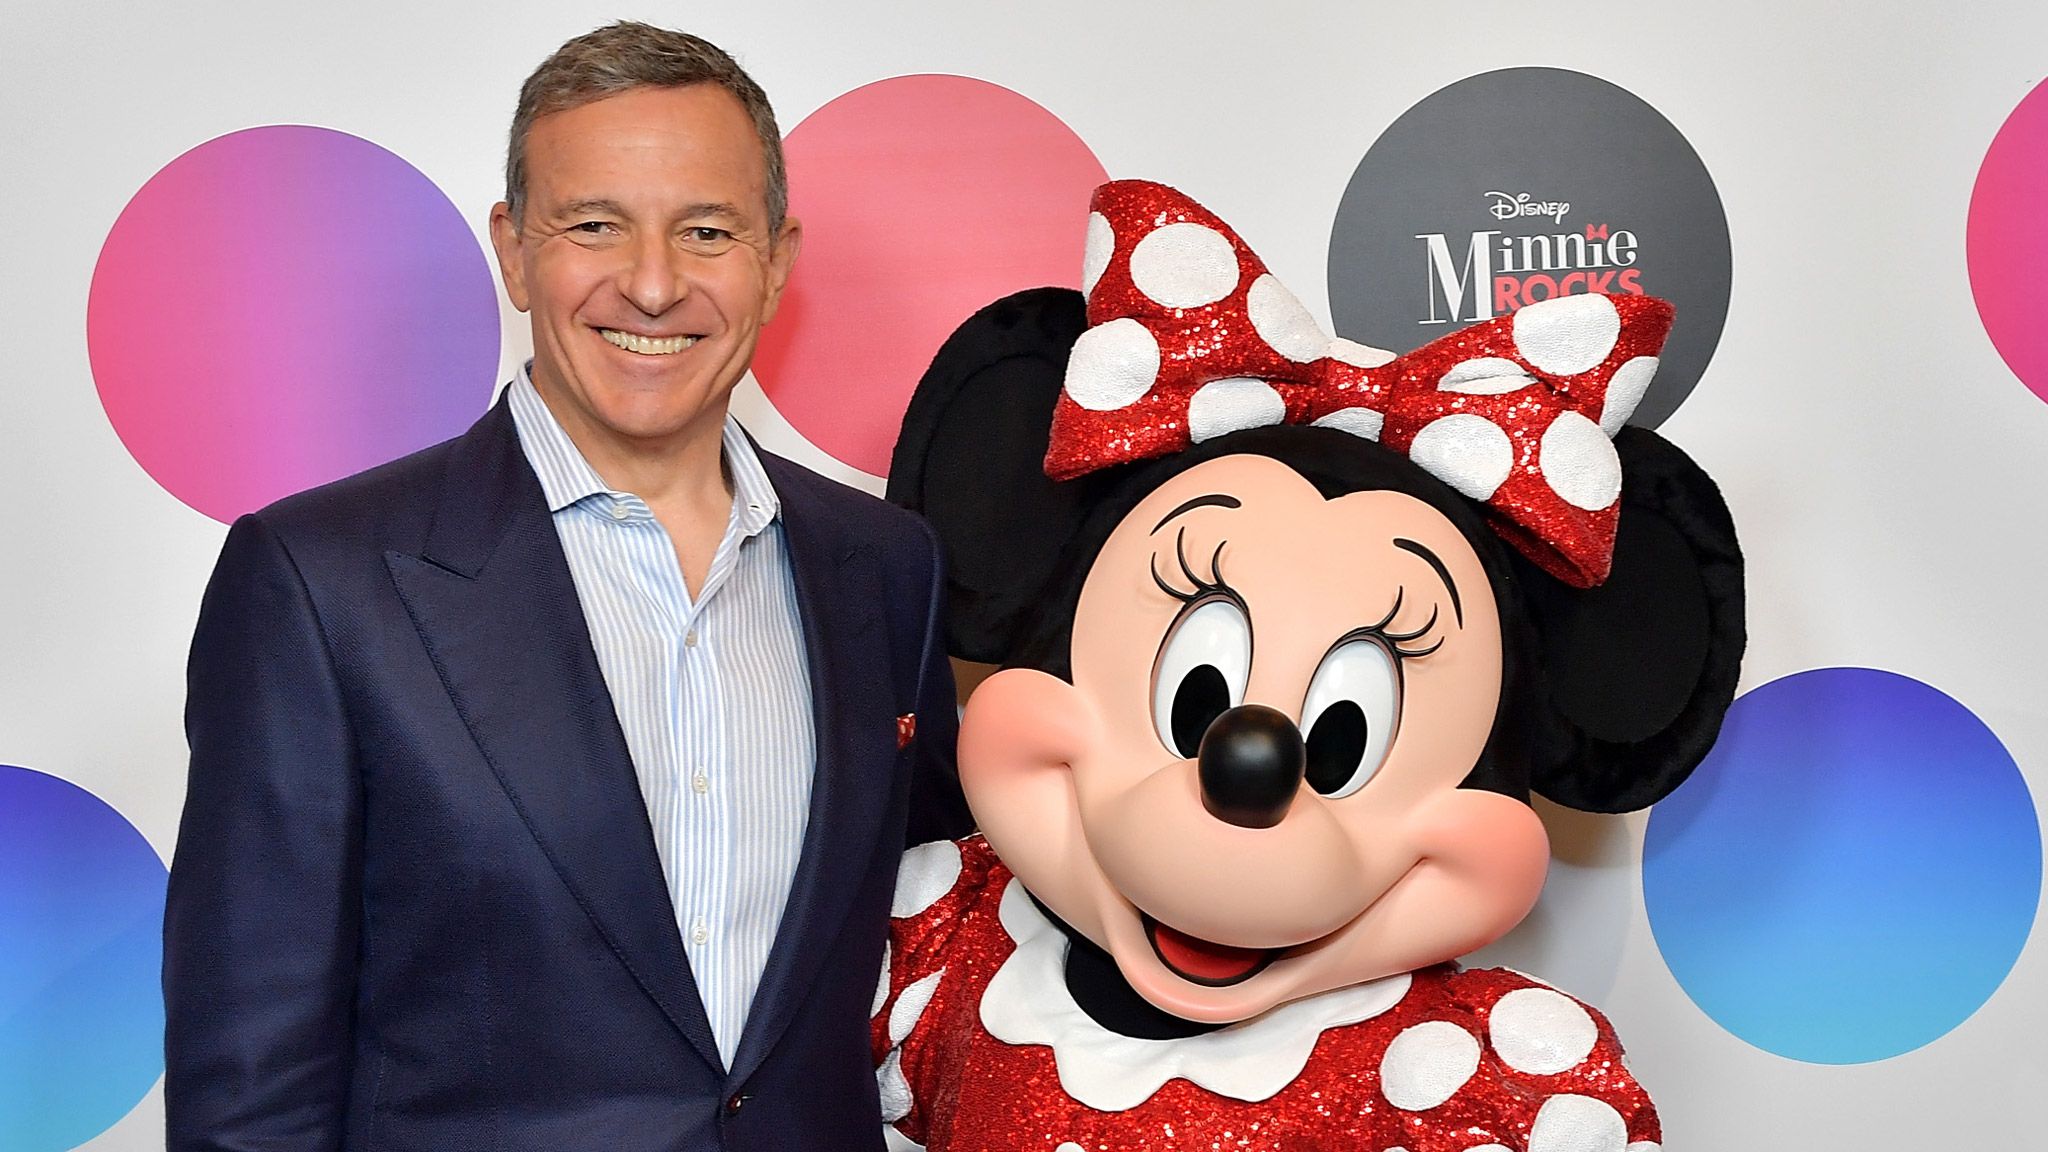 Bob Iger and Minnie Mouse